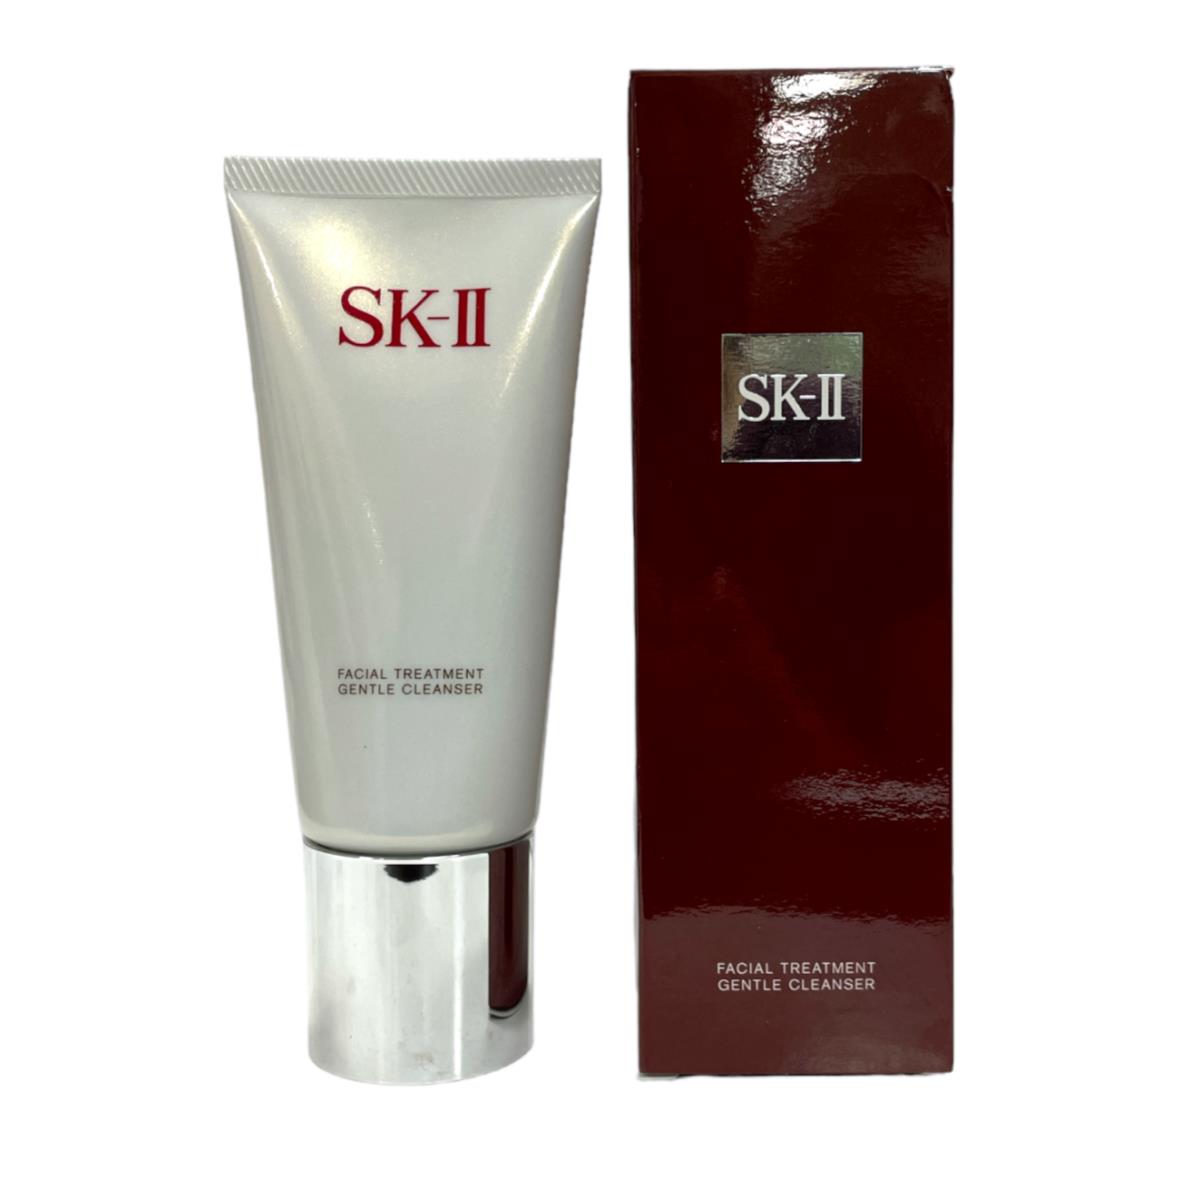 Sk-ii Facial Treatment Gentle Cleanser 120g As Seen In Pictures